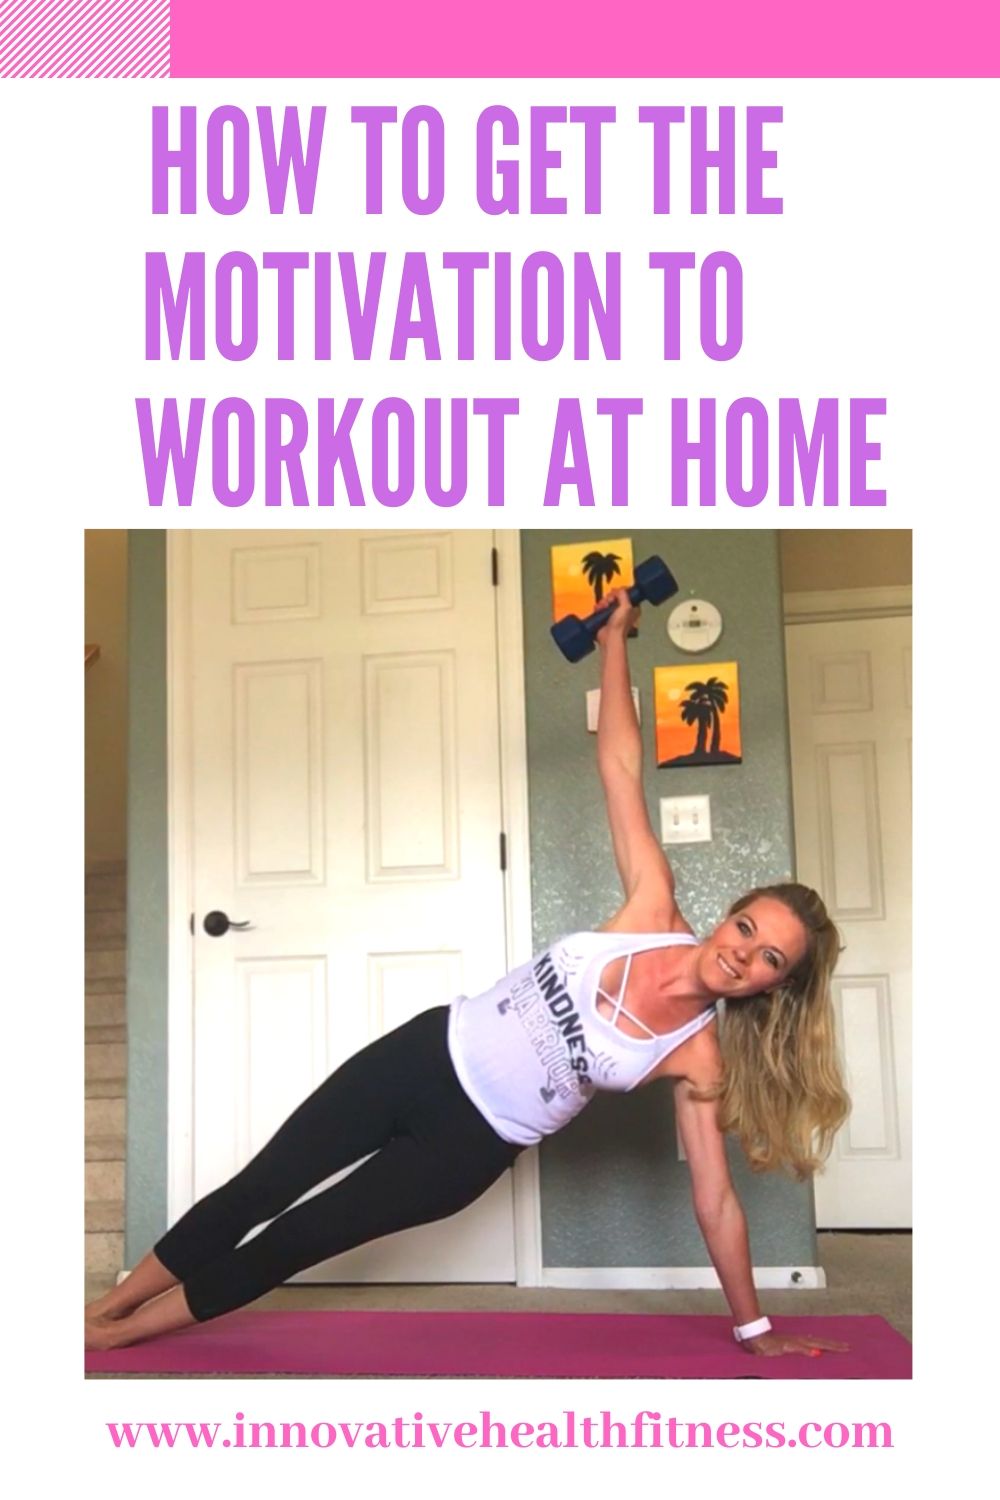 How to get the motivation to work out at home